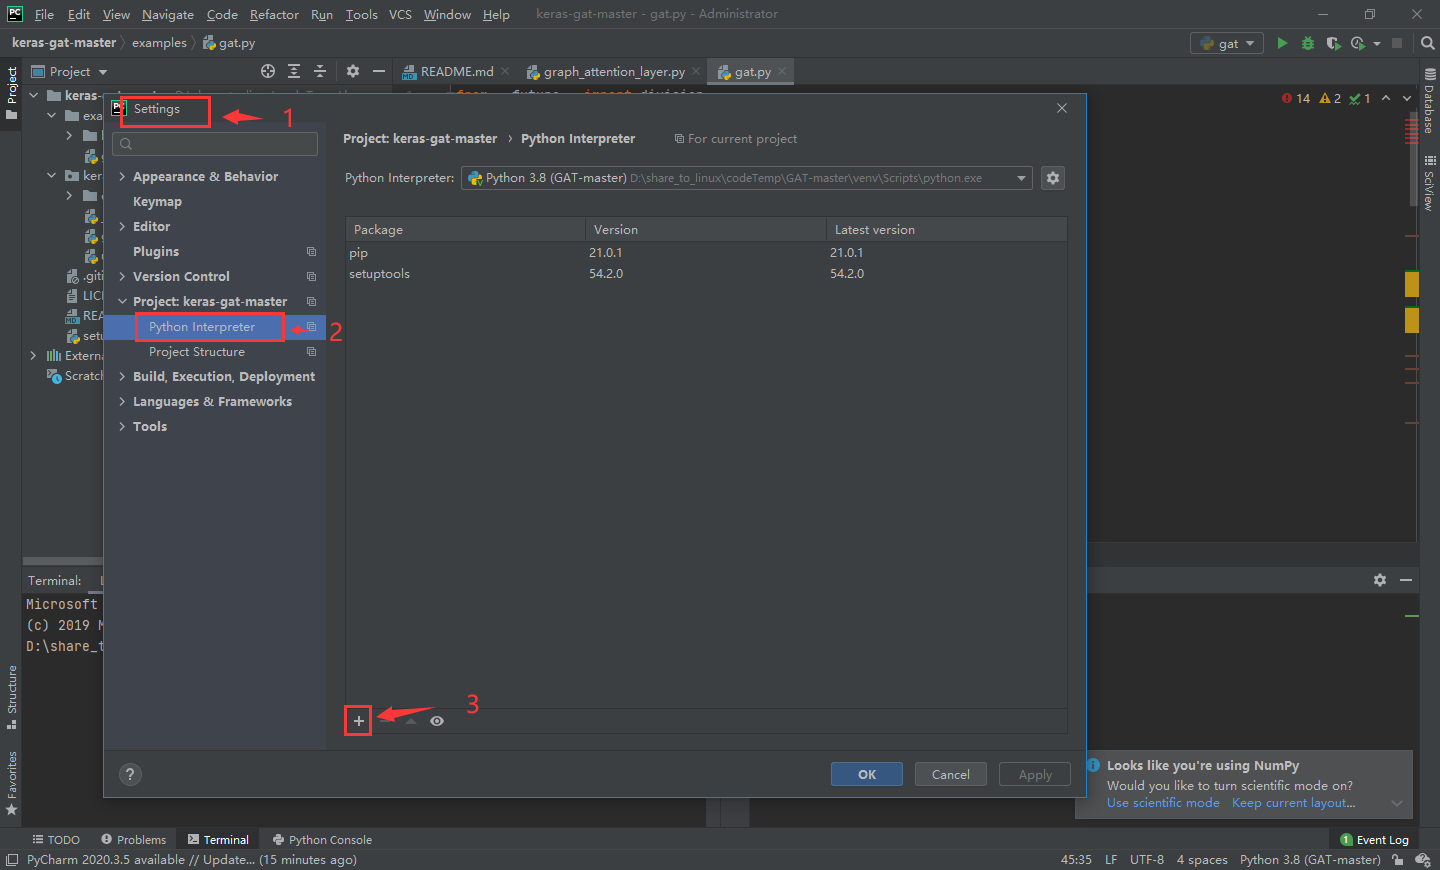 download the last version for android PyCharm